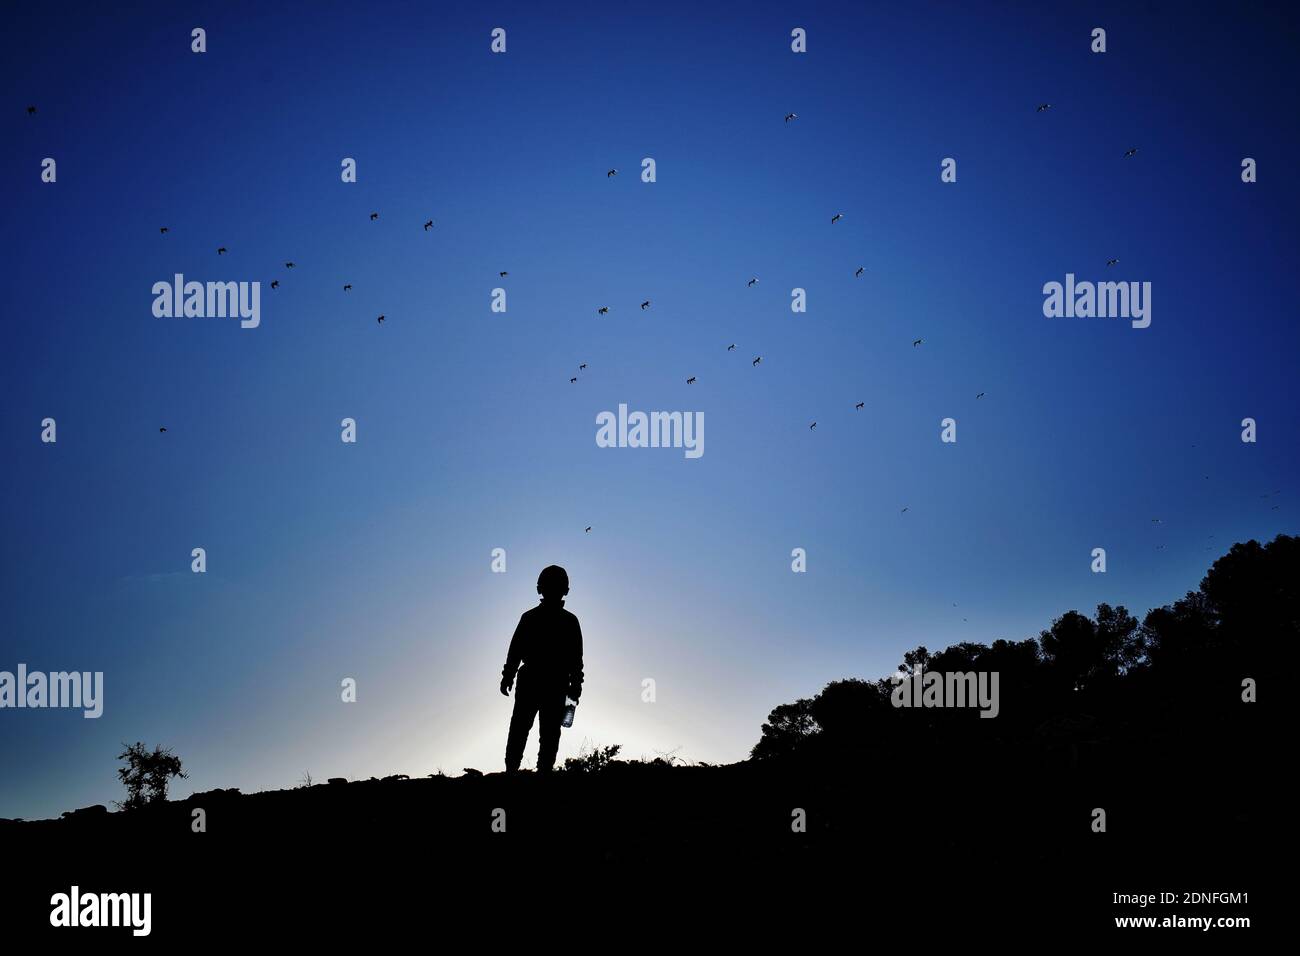 Silhouette Man Standing By Birds Against Blue Sky Stock Photo